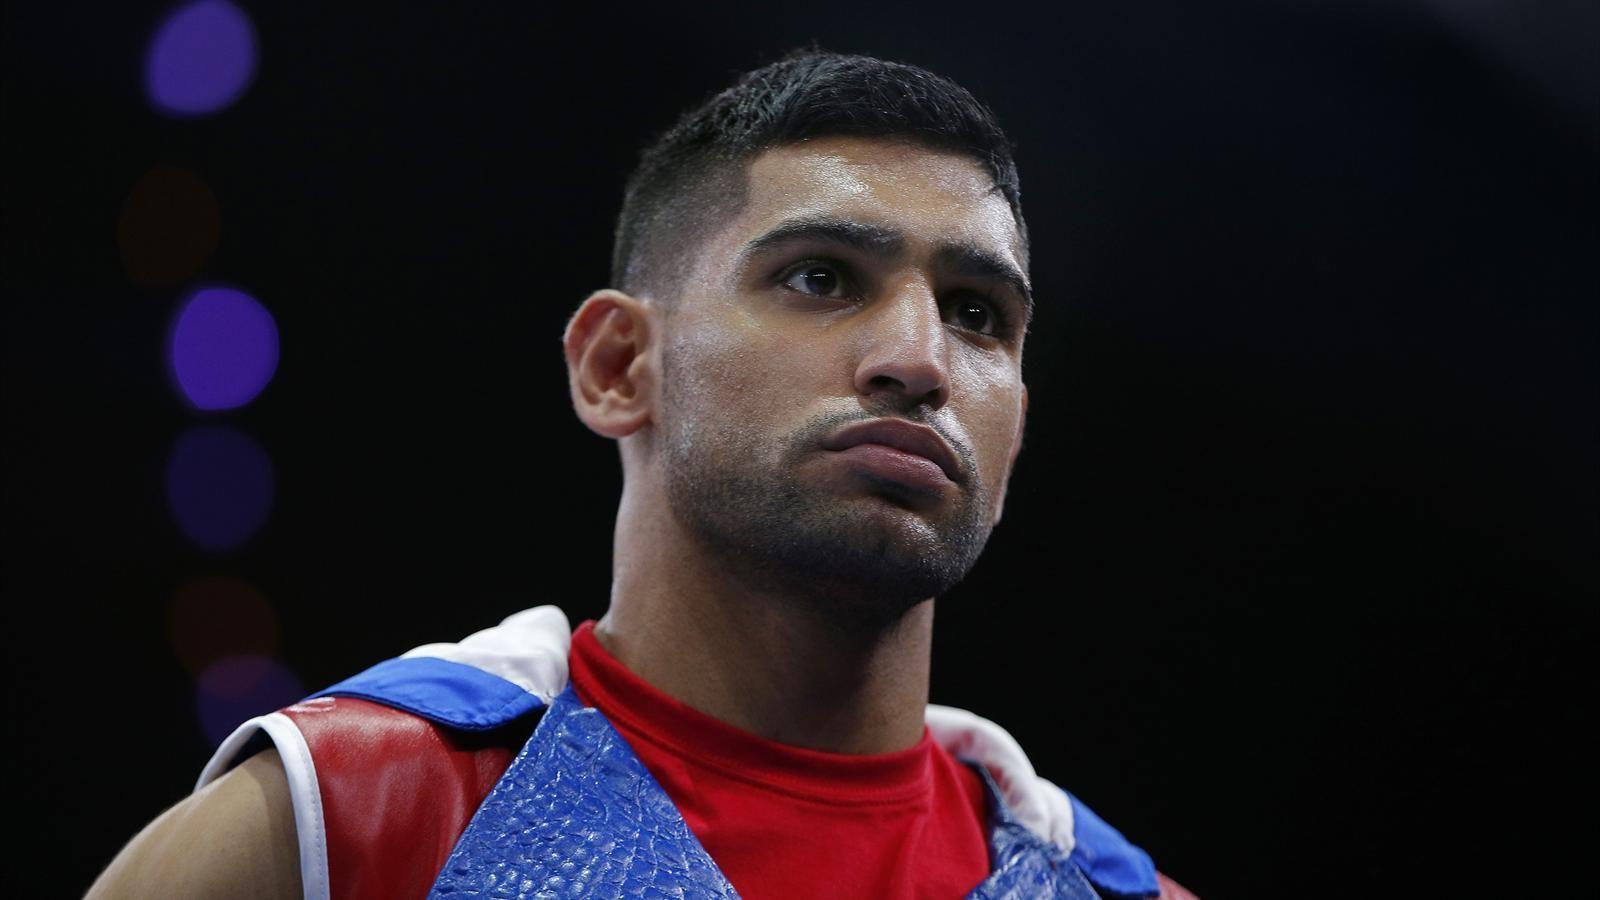 Amir Khan plots career in charity work after boxing career ends